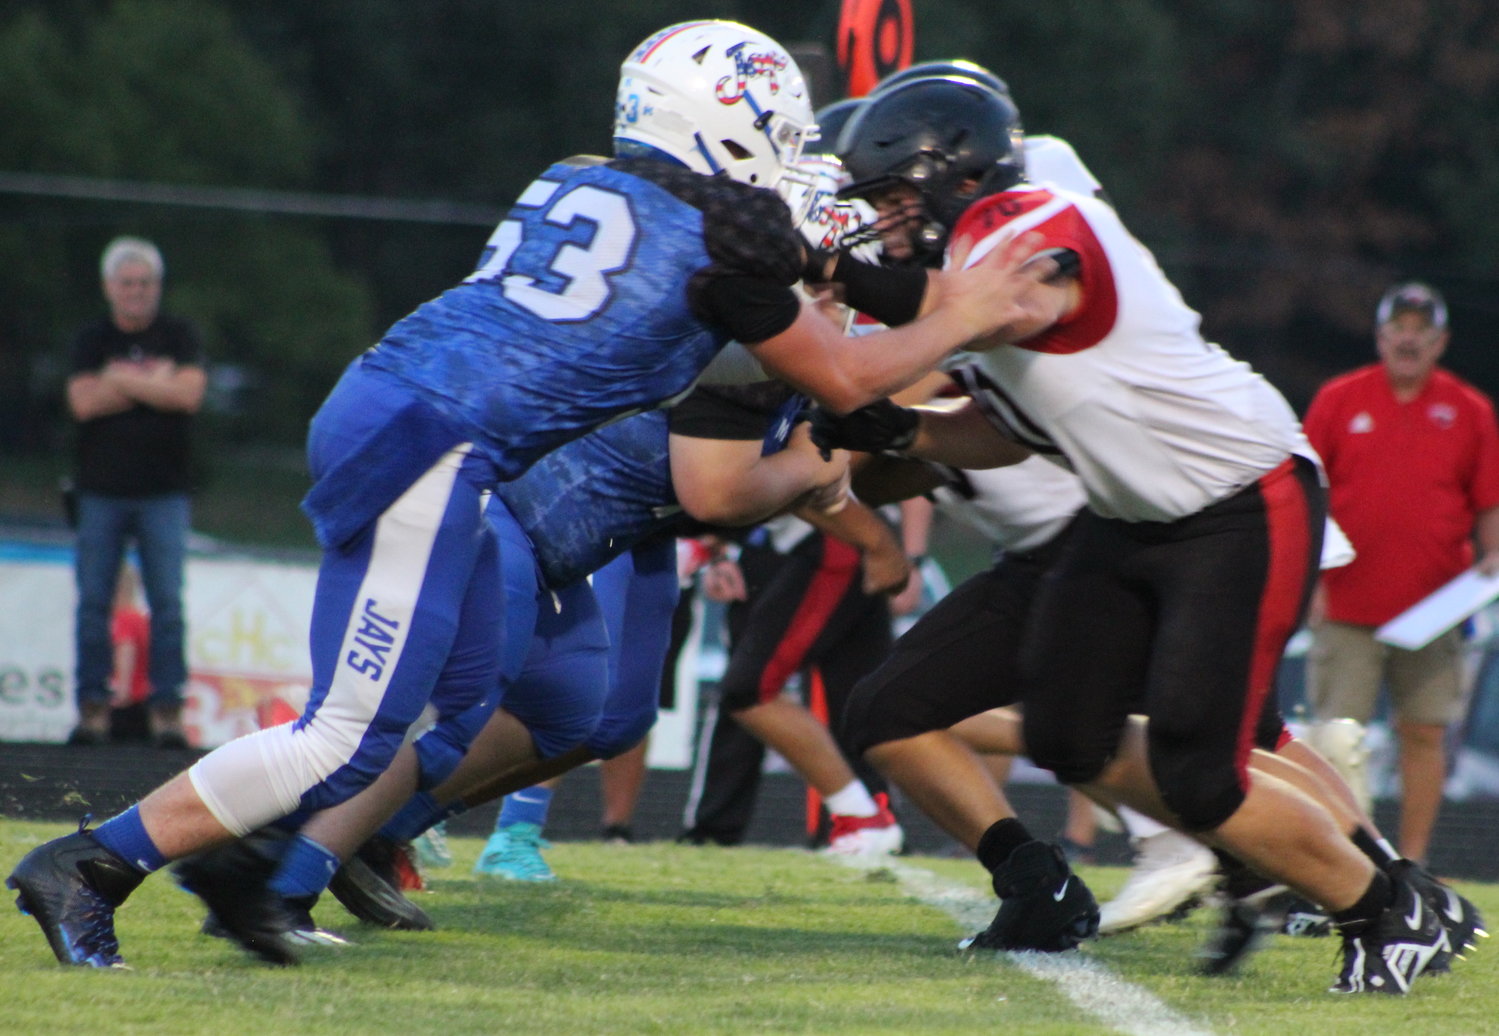 #53 Jagger Robinson squares off against Lamars Offense as he and the rest of the Jays' defense try to stop the Tigers from gaining years.